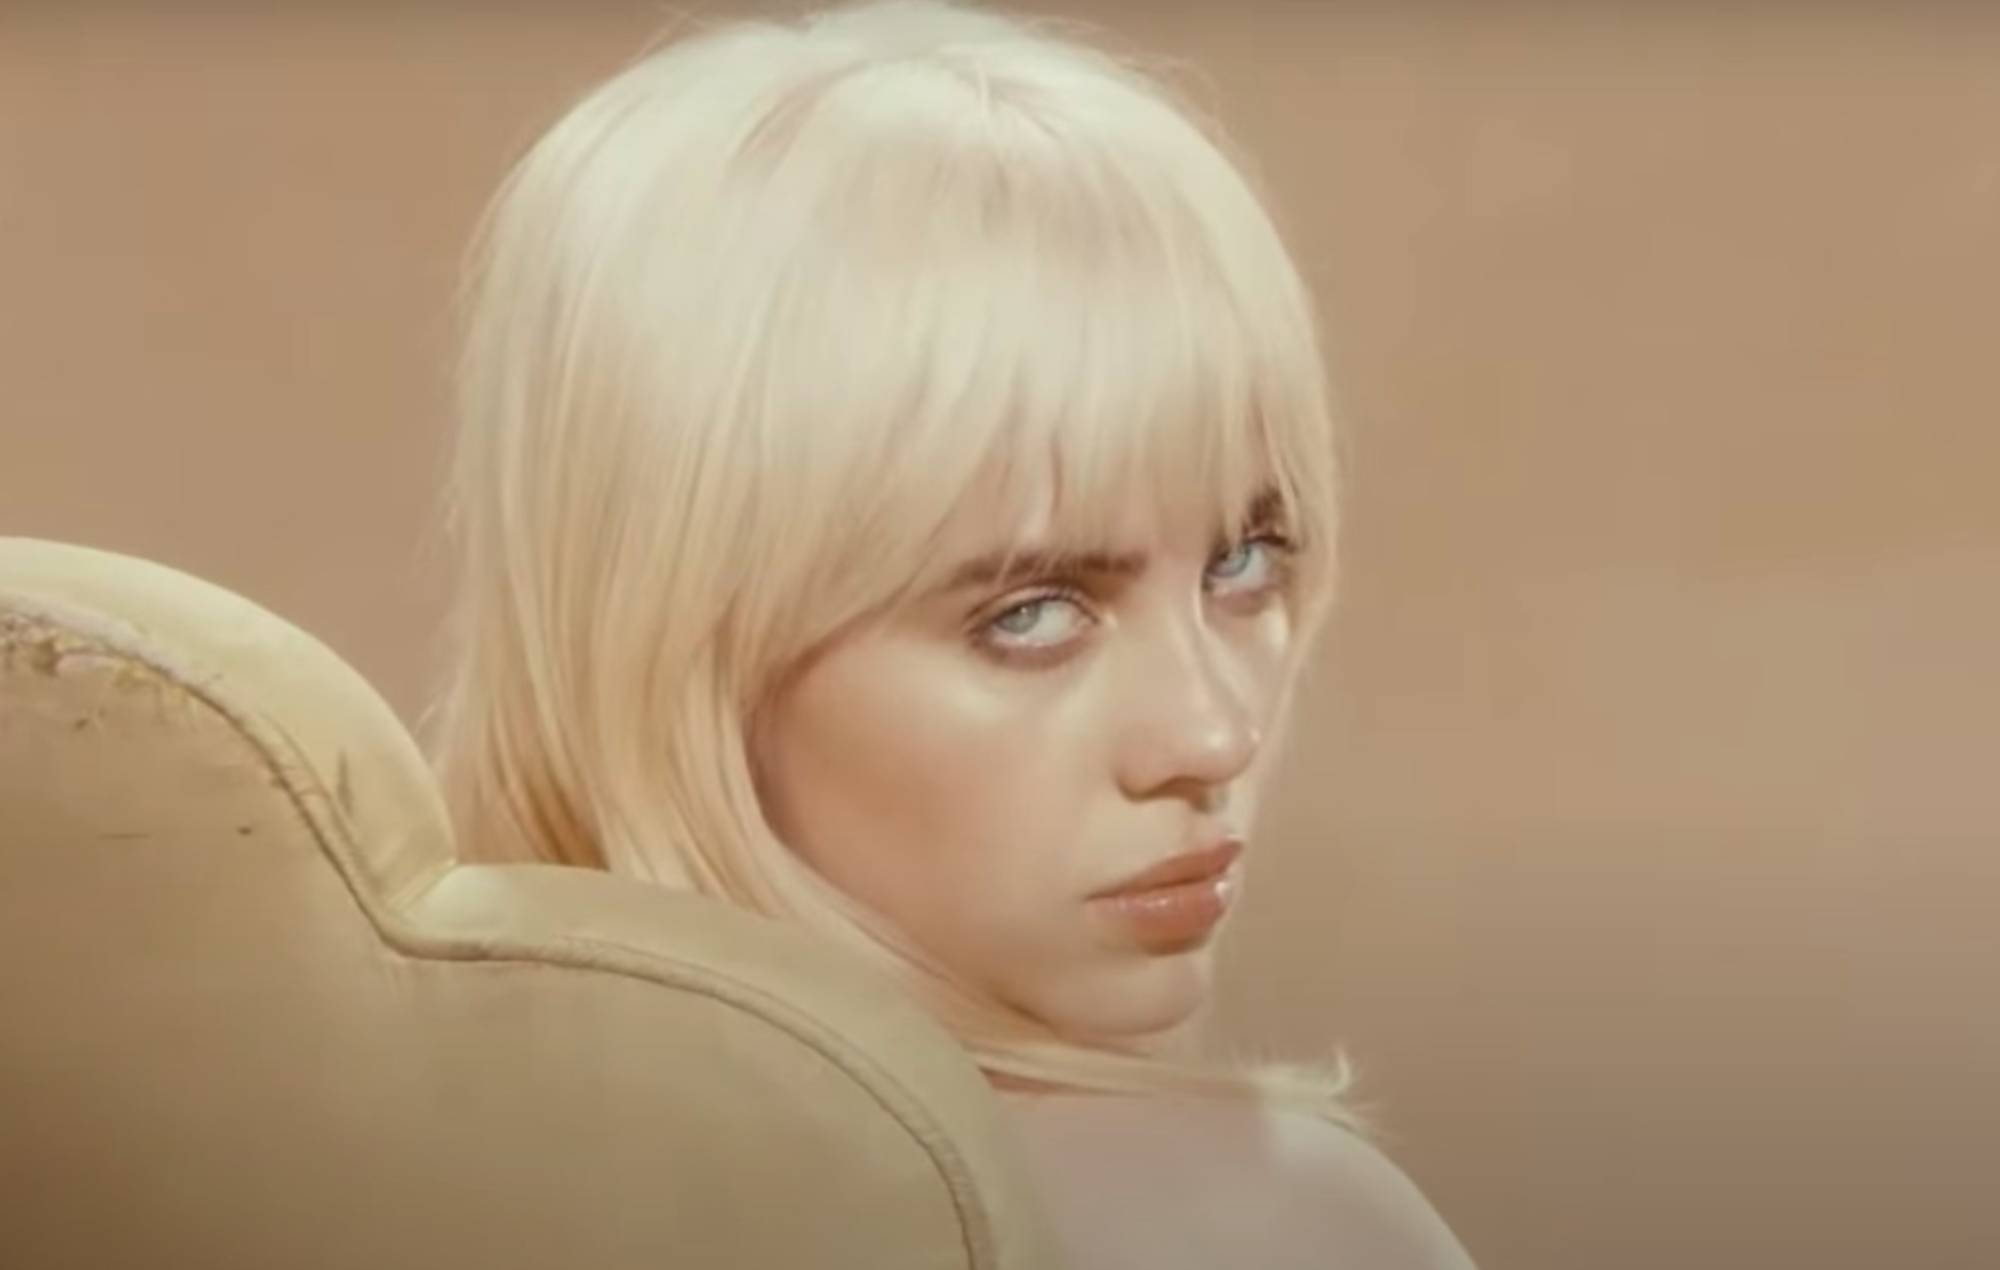 Billie Eilish dyed her hair blonde because of a fan's photo edit